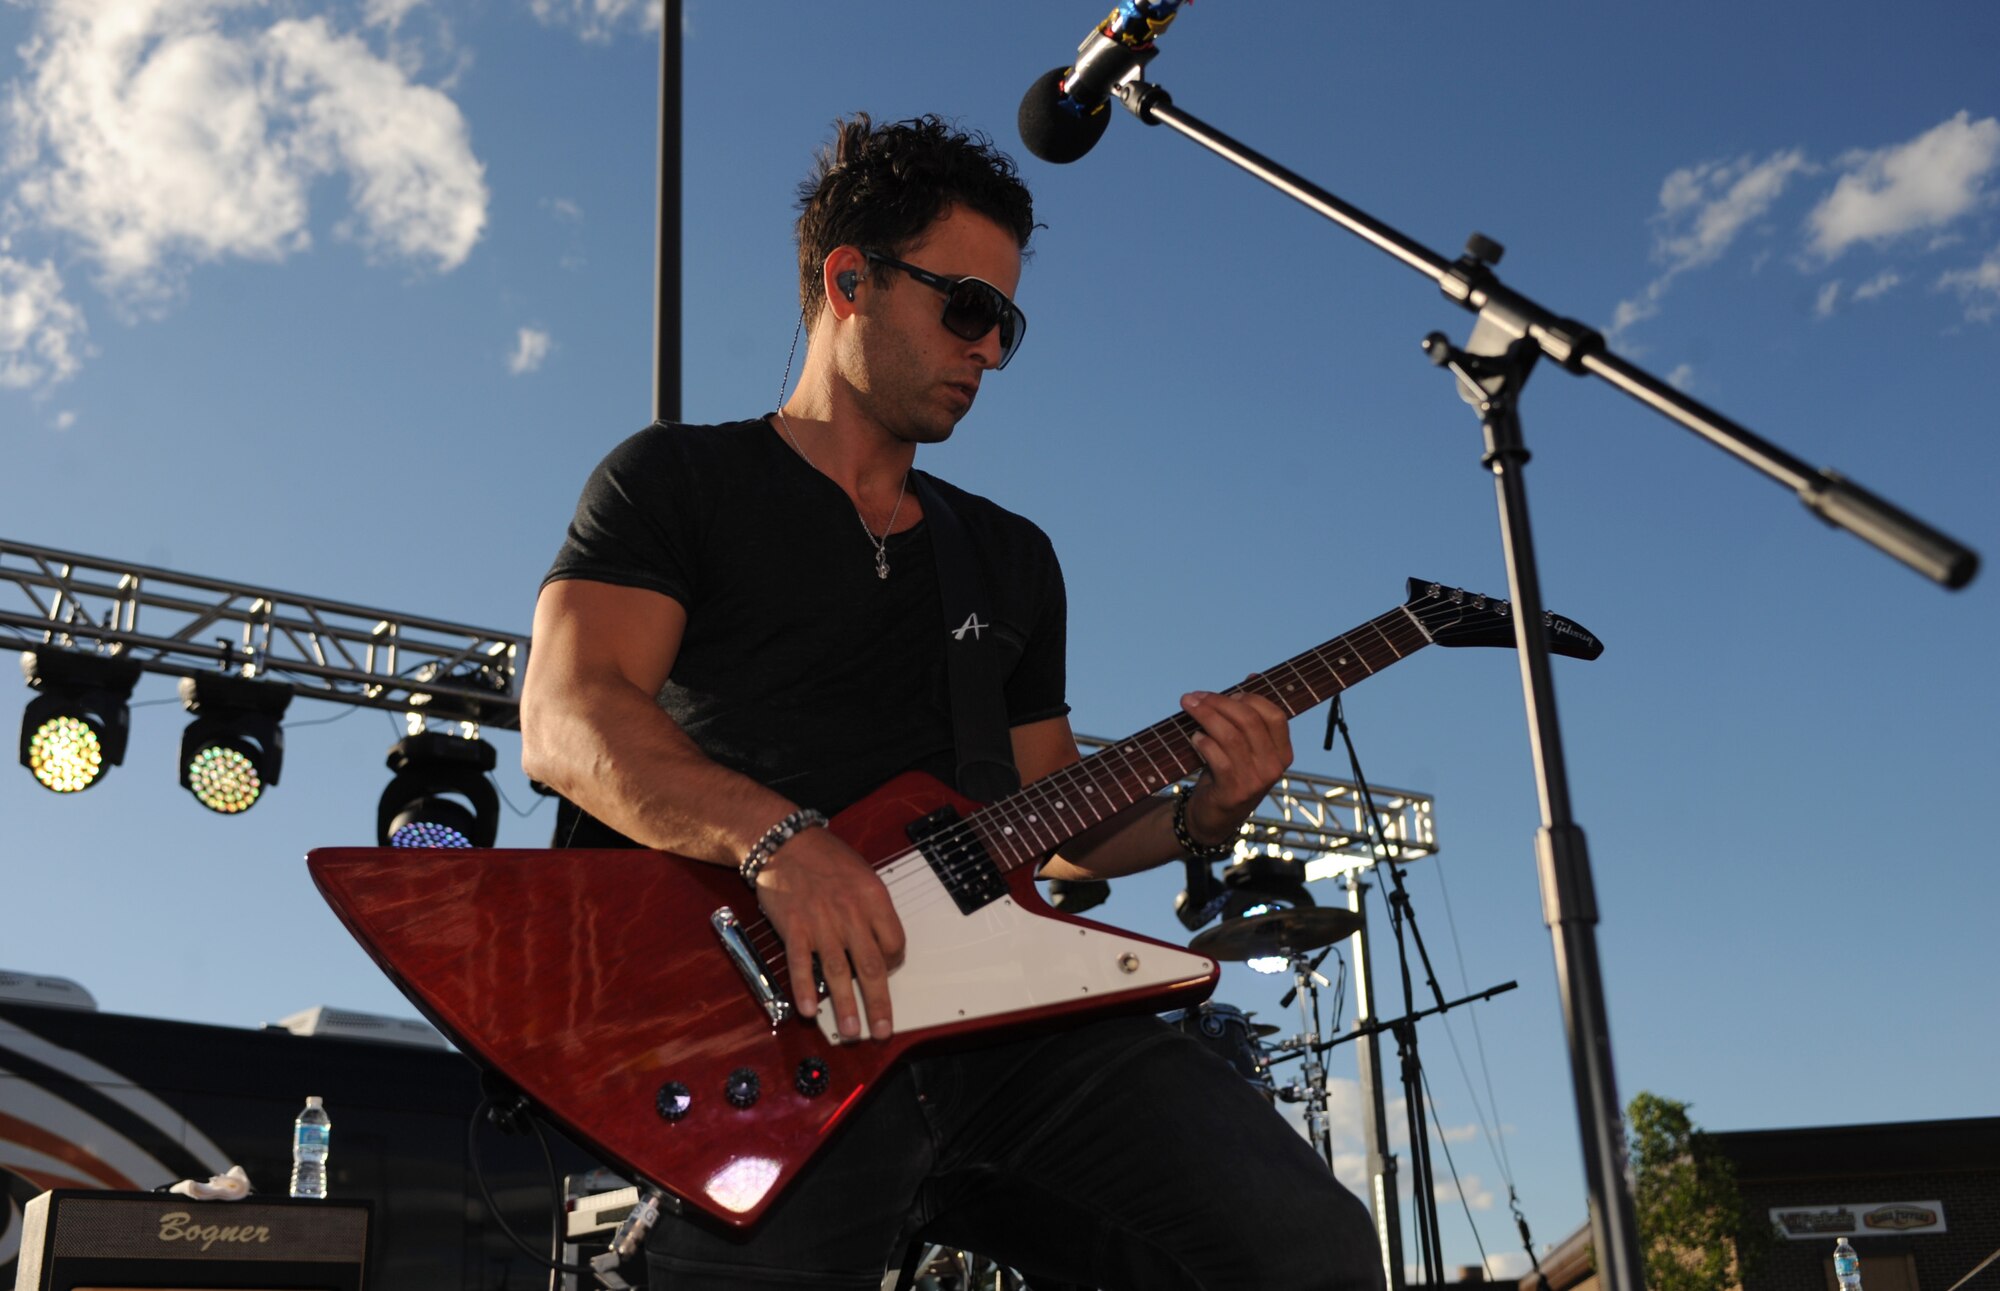 Andy Skib, guitarist for David Cook, plays guitar during a free concert outside the Dakota’s Club at Ellsworth Air Force Base, S.D., June 3, 2016. The concert was sponsored by the Air Force Services Activity’s entertainment program. (U.S. Air Force photo by Airman 1st Class Denise M. Nevins/Released)